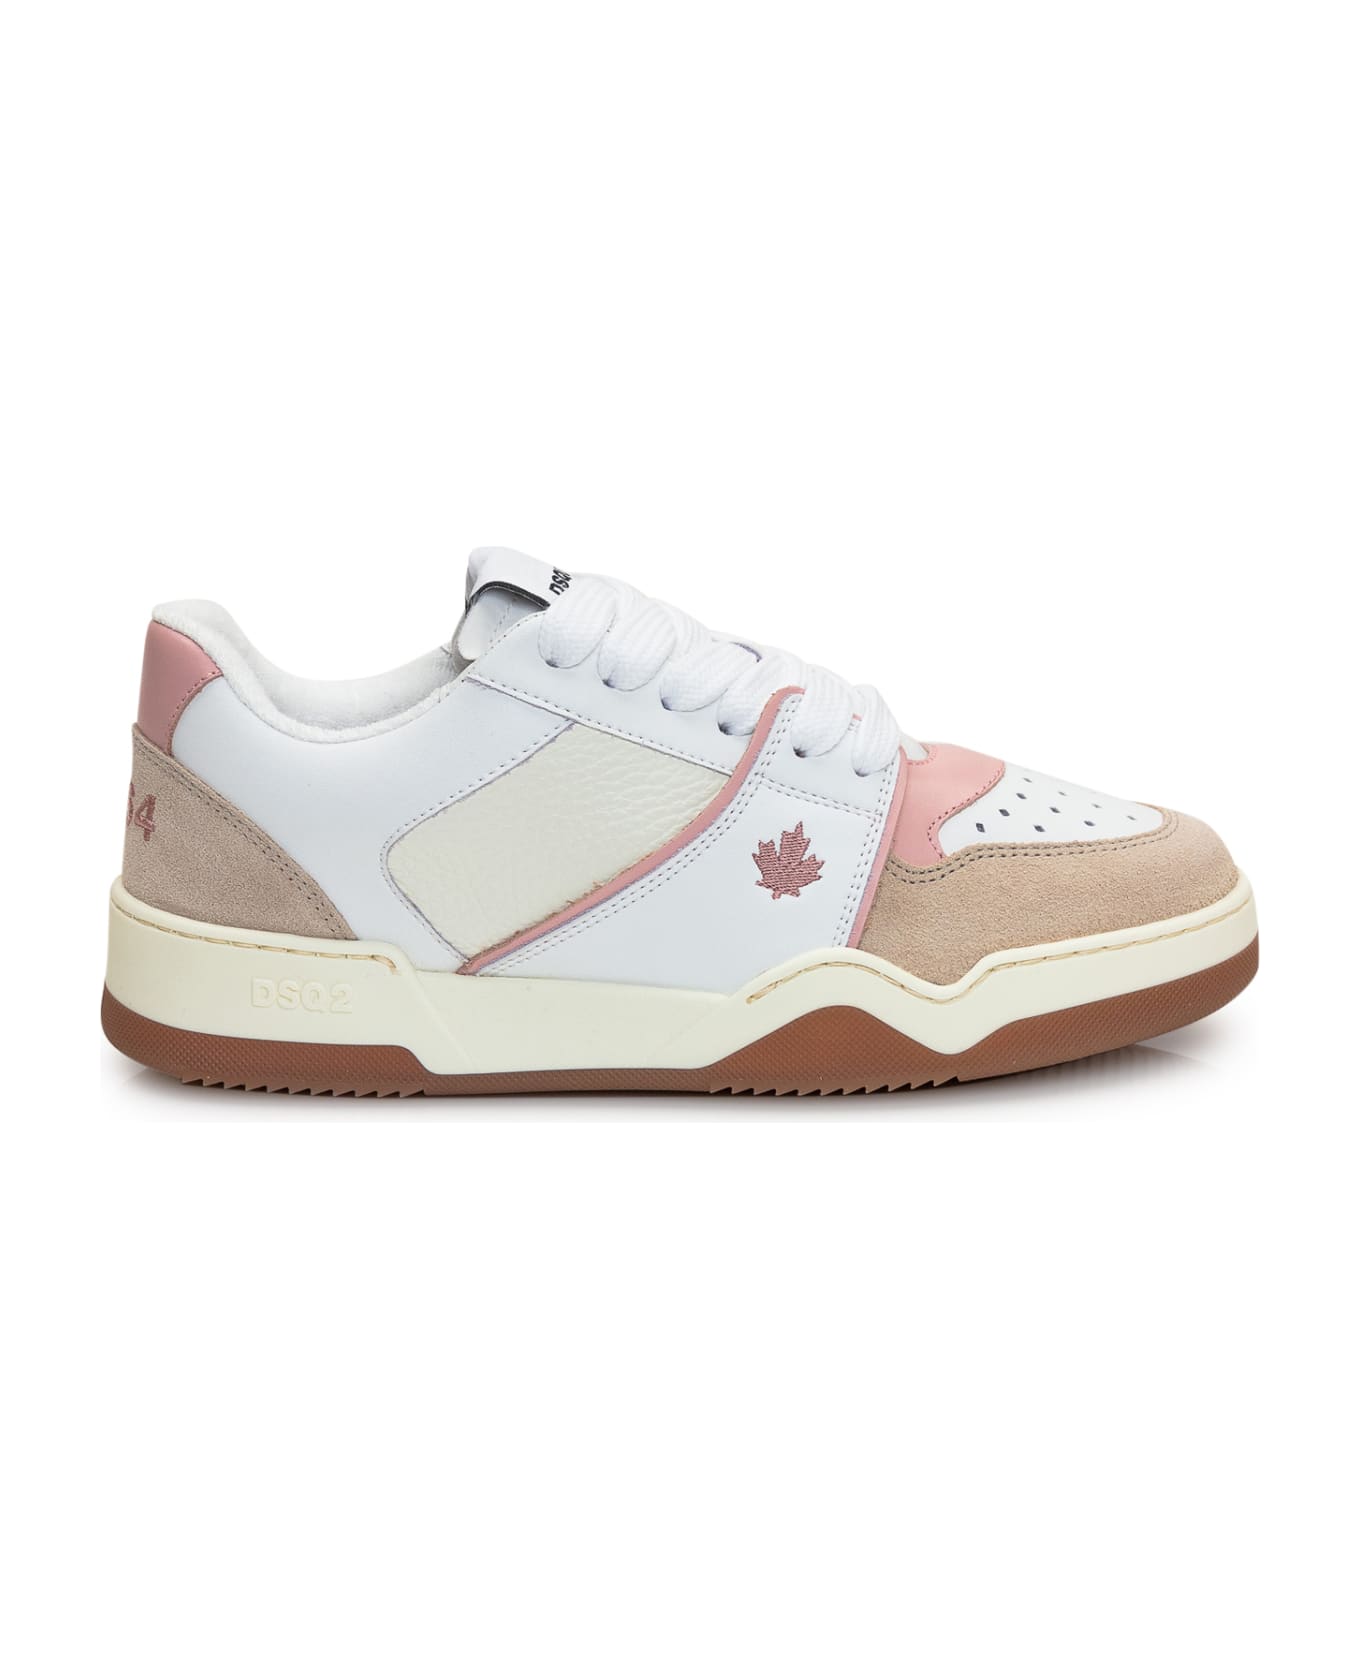 Dsquared2 Spiker Leather Low-top Sneakers - White